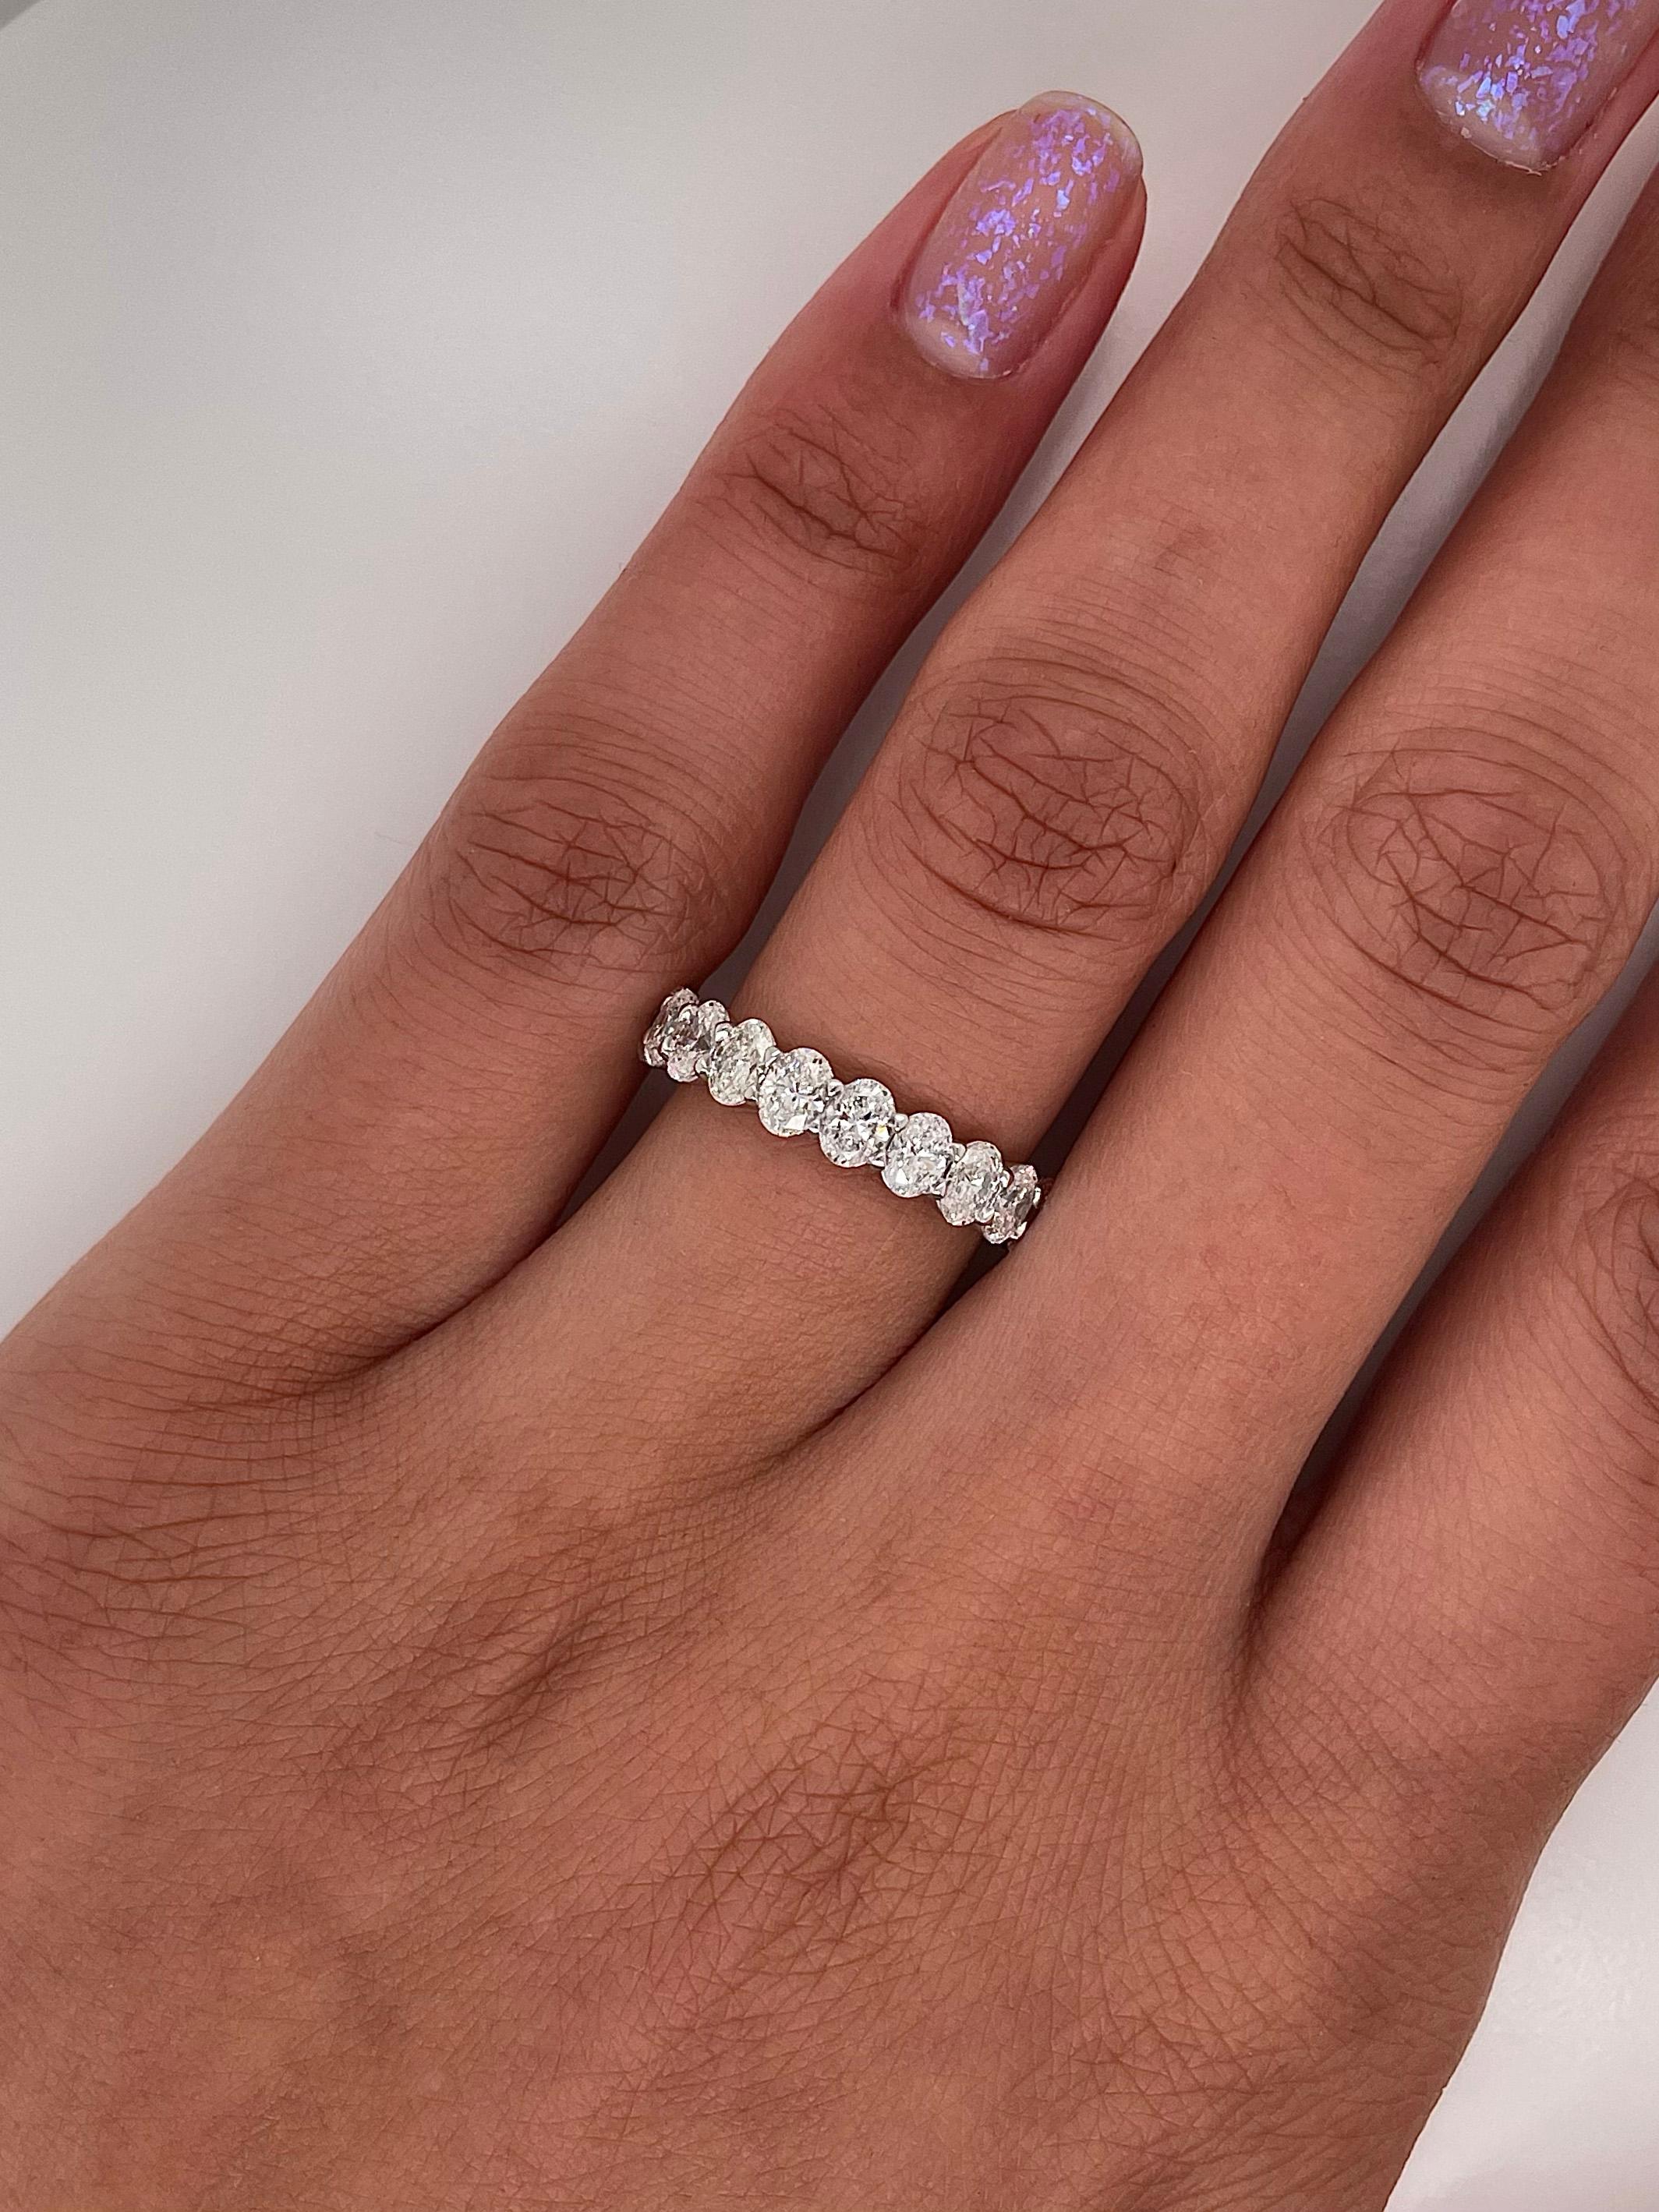 Ladies diamond Eternity band carries 2.94 total Carats of oval cut diamonds placed in platinum. 

Size: 6.0
Color: G
Clarity: VS

This shared prong style Eternity band was handmade by our jewelers in New York City.